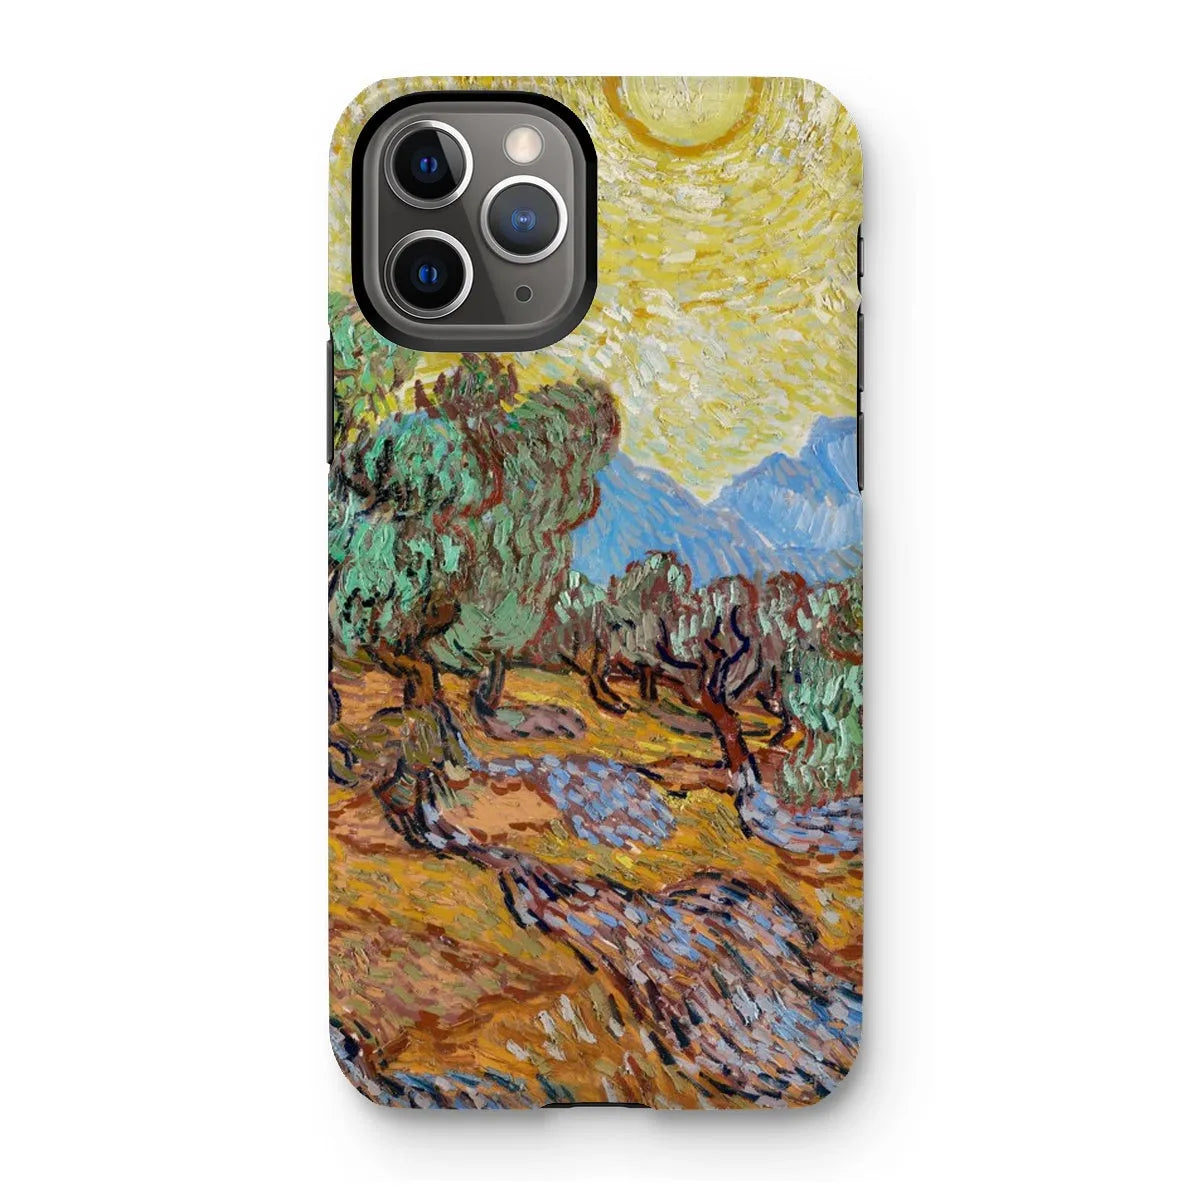 Olive Trees Too - Impressionist Phone Case - Vincent Van Gogh - Iphone 11 Pro / Matte - Mobile Phone Cases - Aesthetic